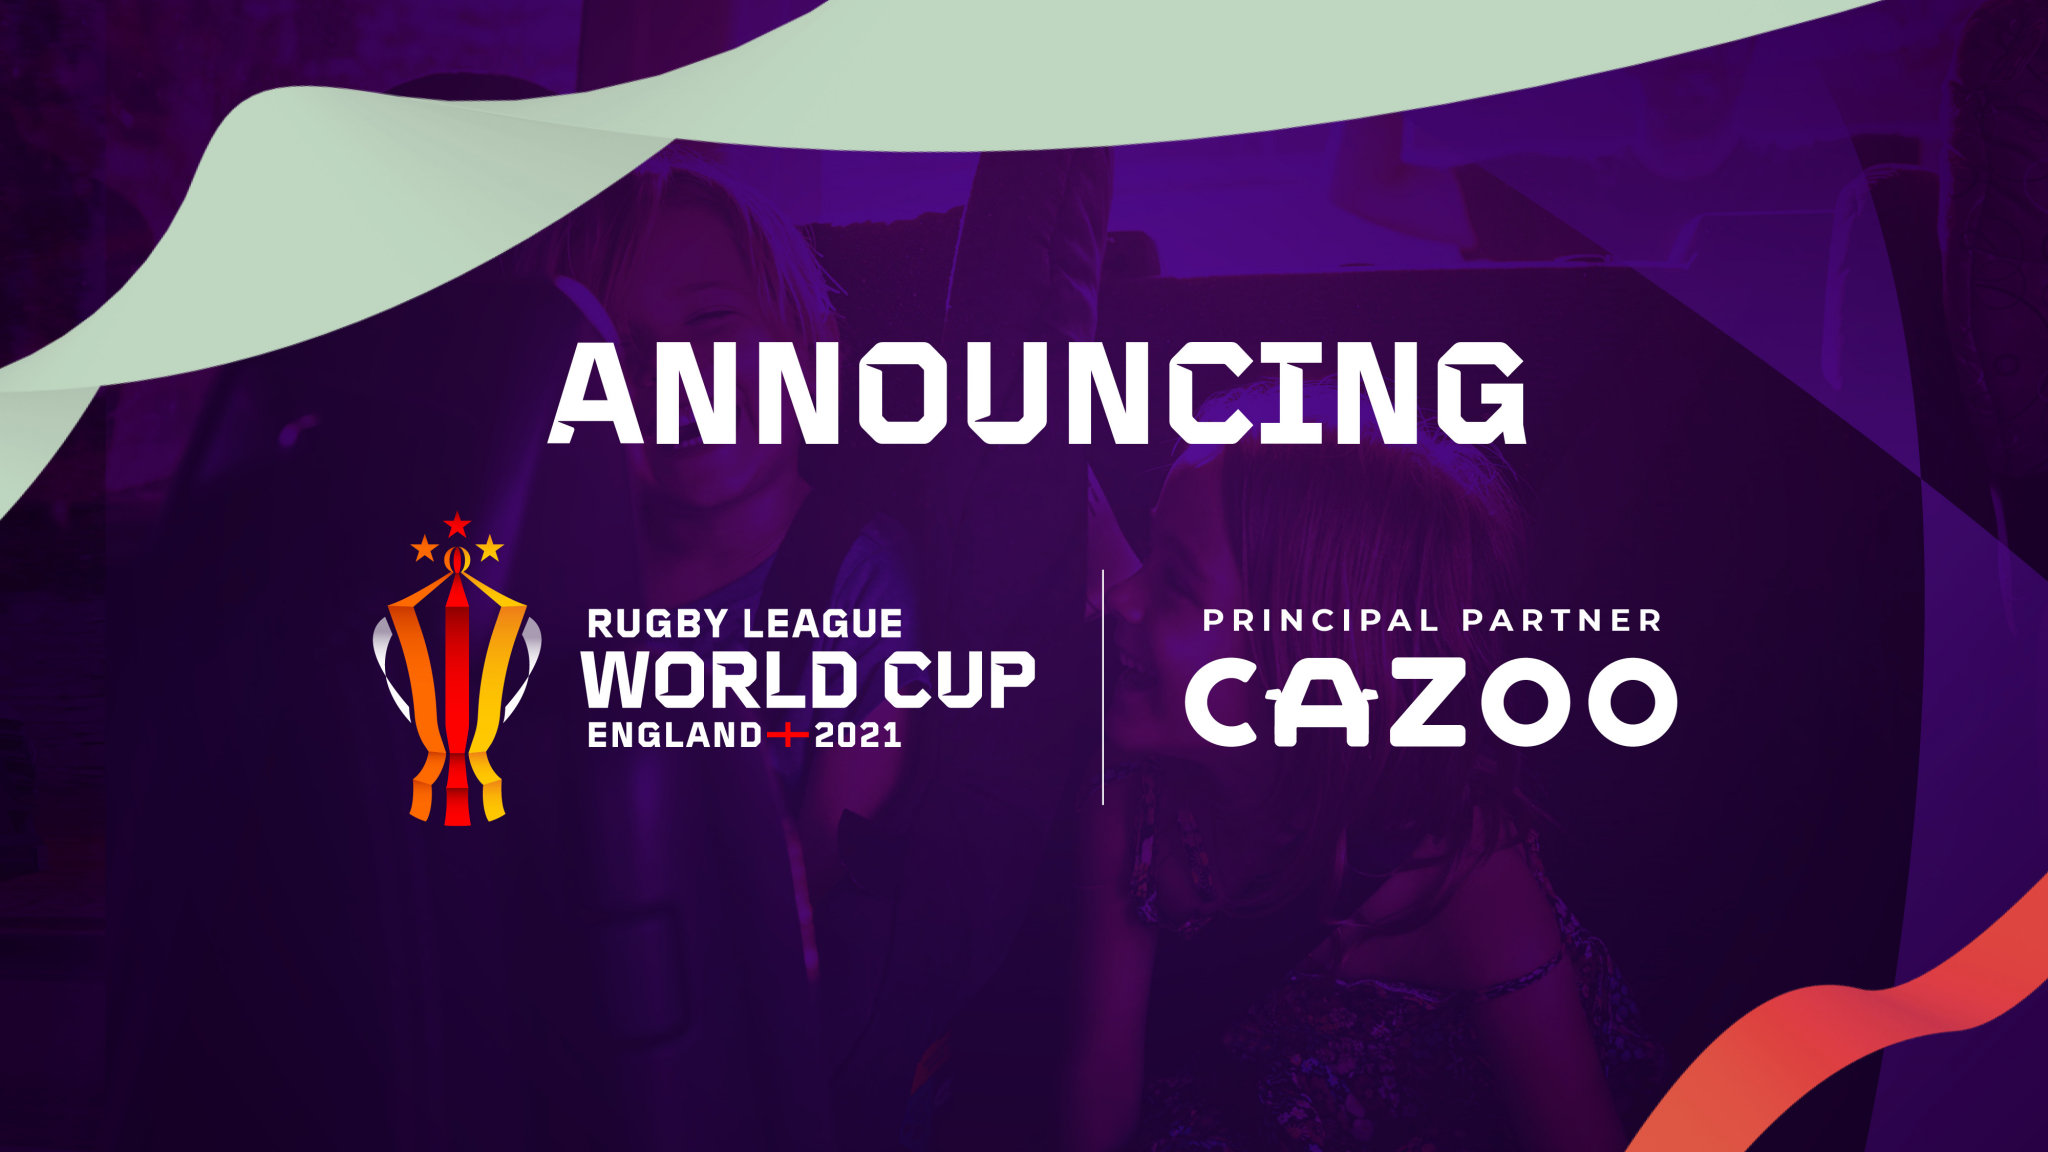 Cazoo will be the principal sponsor of the 2021 Rugby League World Cup ©RLWC2021 